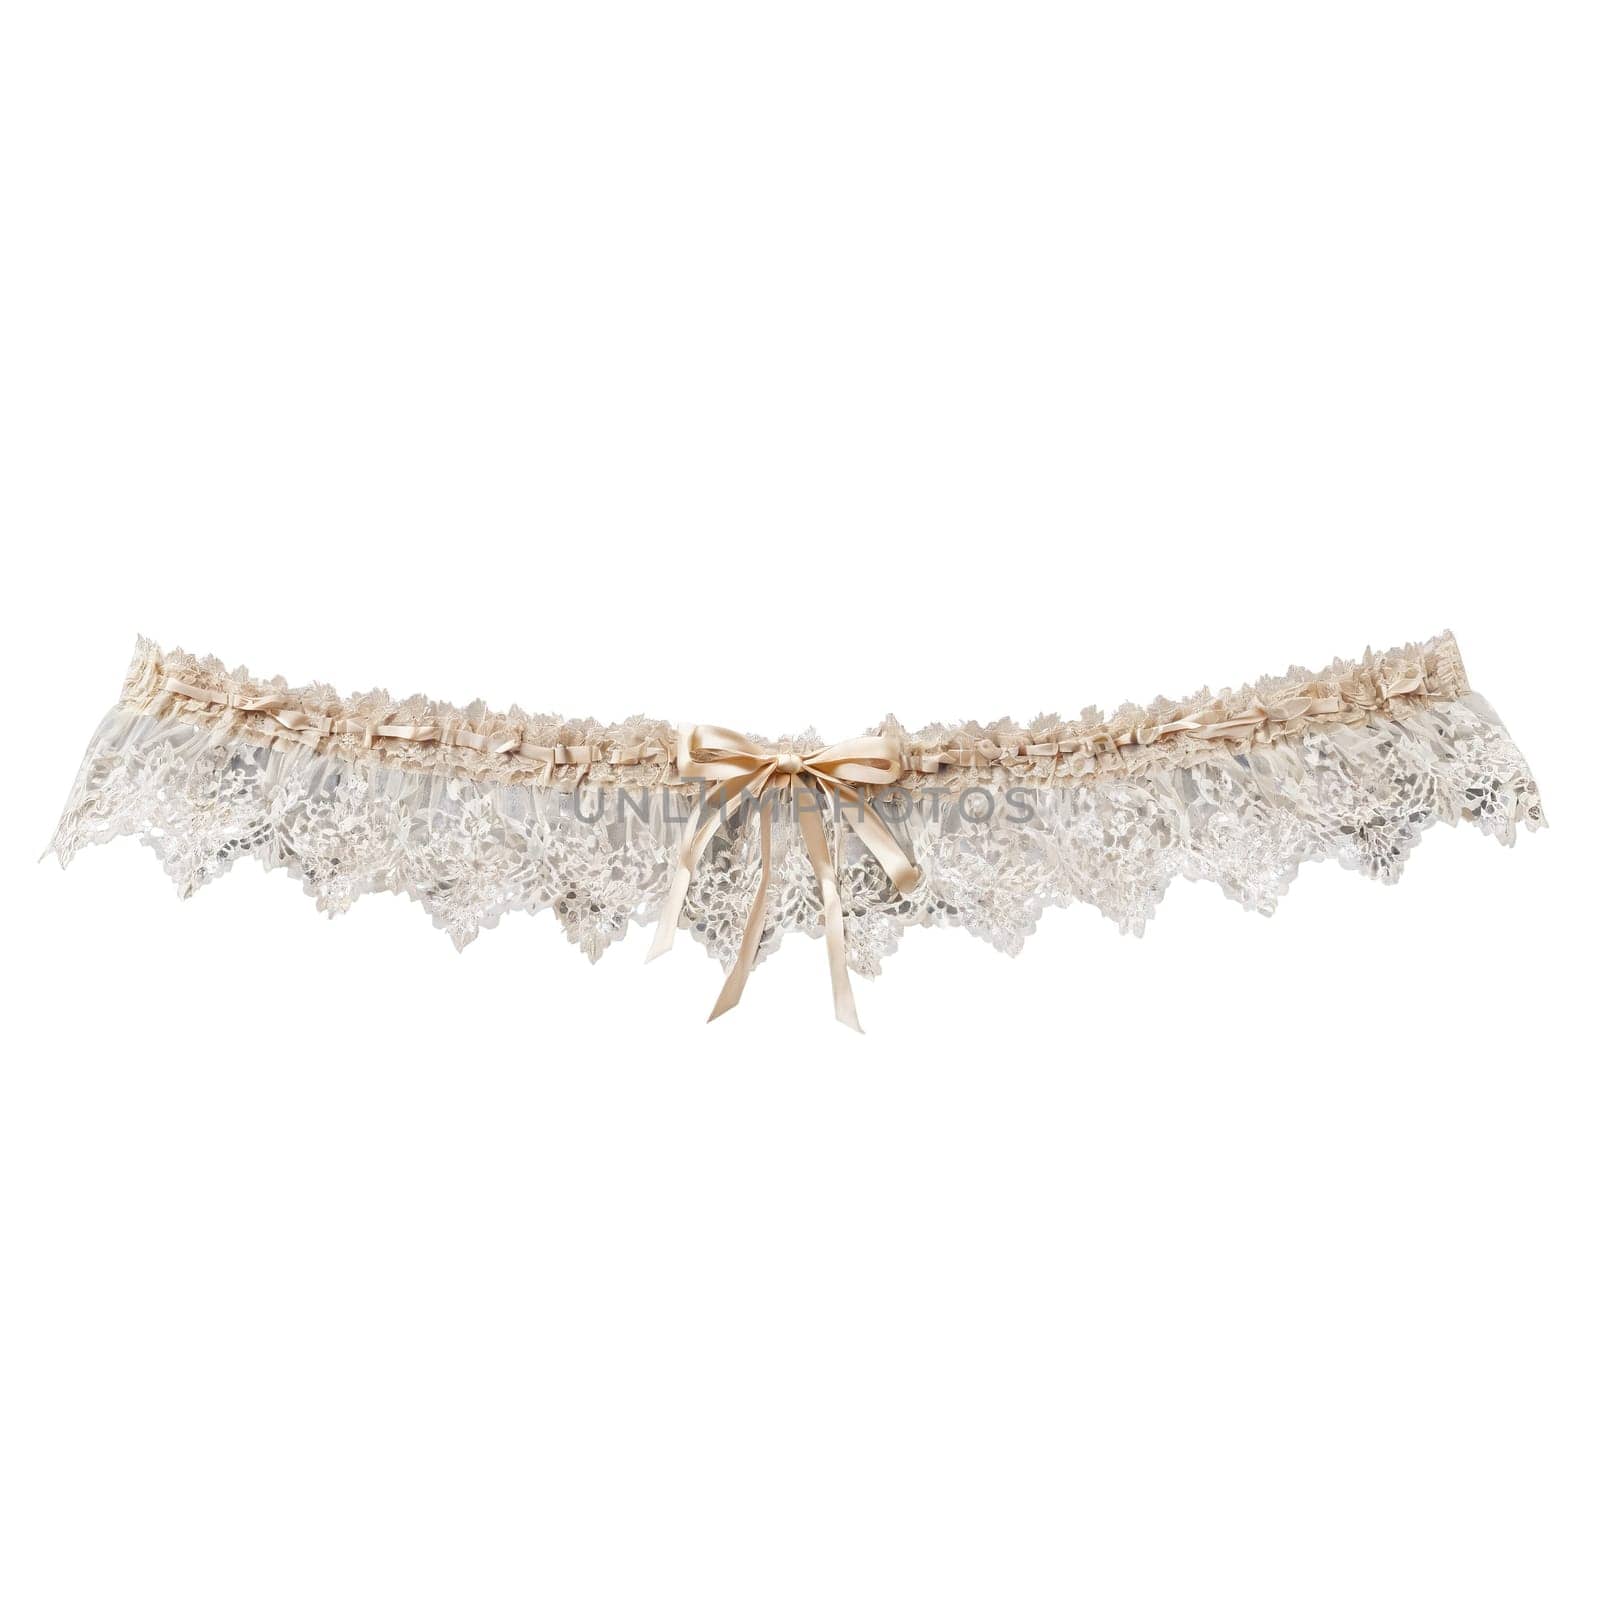 Soft beige lace garter belt fluttering gently with a feather light touch delicate and clear. Woman lingerie isolated on transparent background.